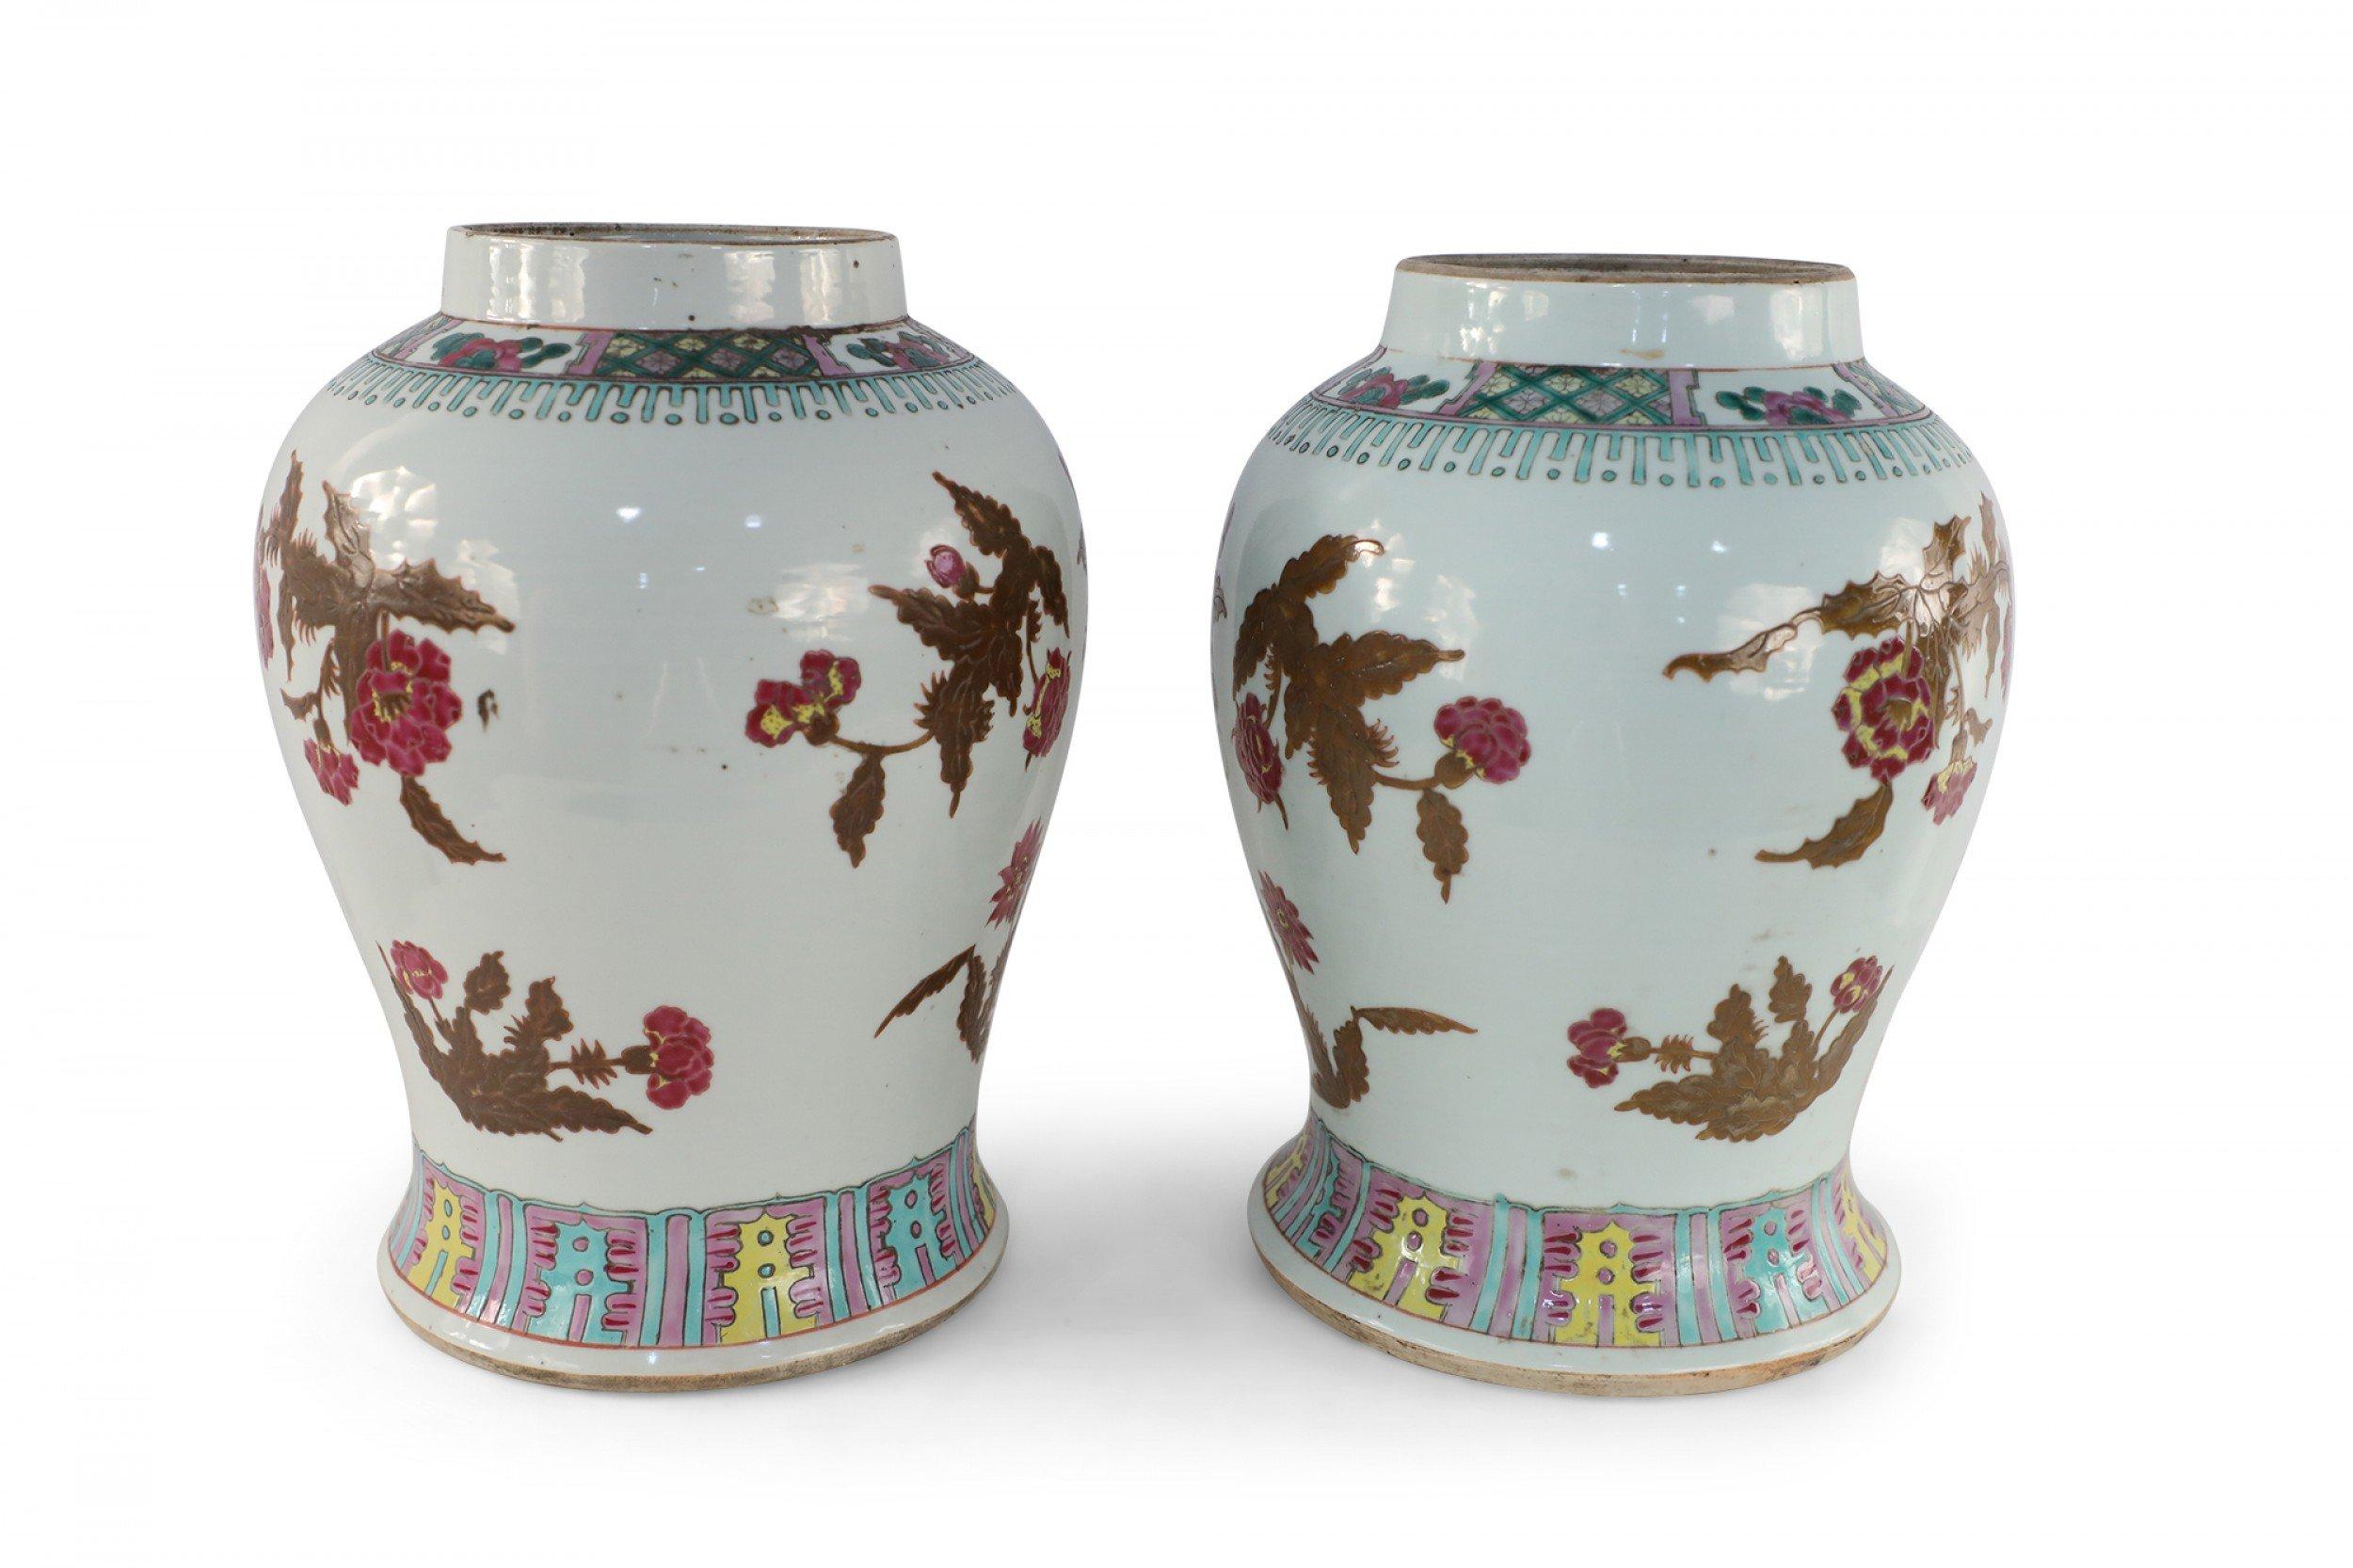 20th Century Pair of Chinese White and Umber Floral Design Porcelain Vases For Sale